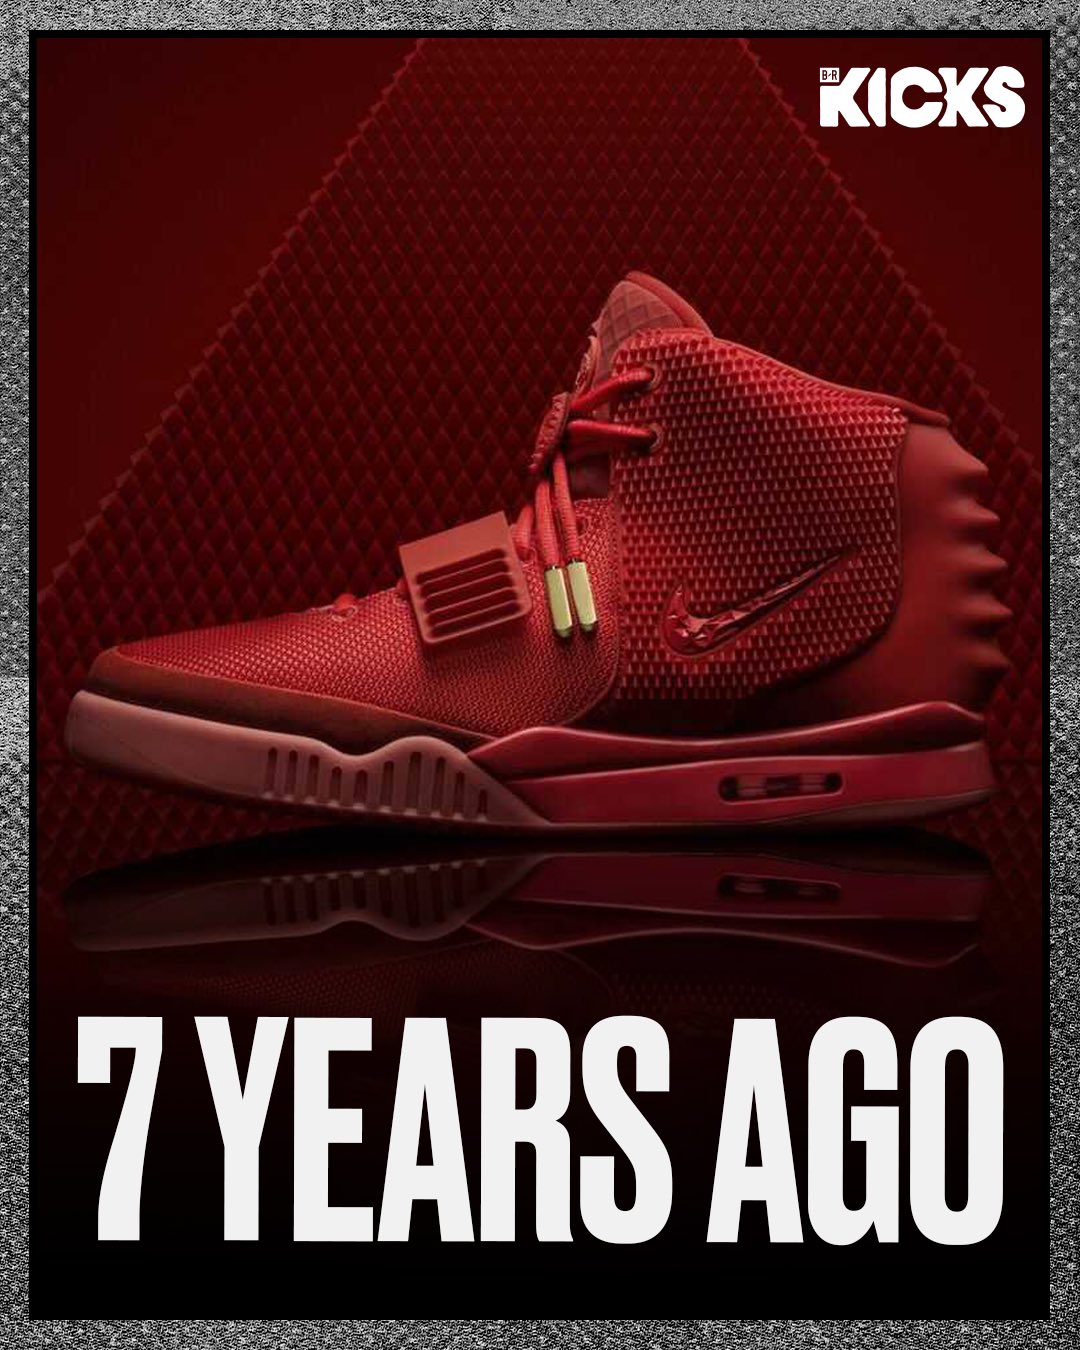 repentino gemelo Patológico B/R Kicks on Twitter: "The Nike Air Yeezy 2 “Red October” released seven  years ago today. Who copped and still has their pair?  https://t.co/qXC3E0j1RN" / Twitter